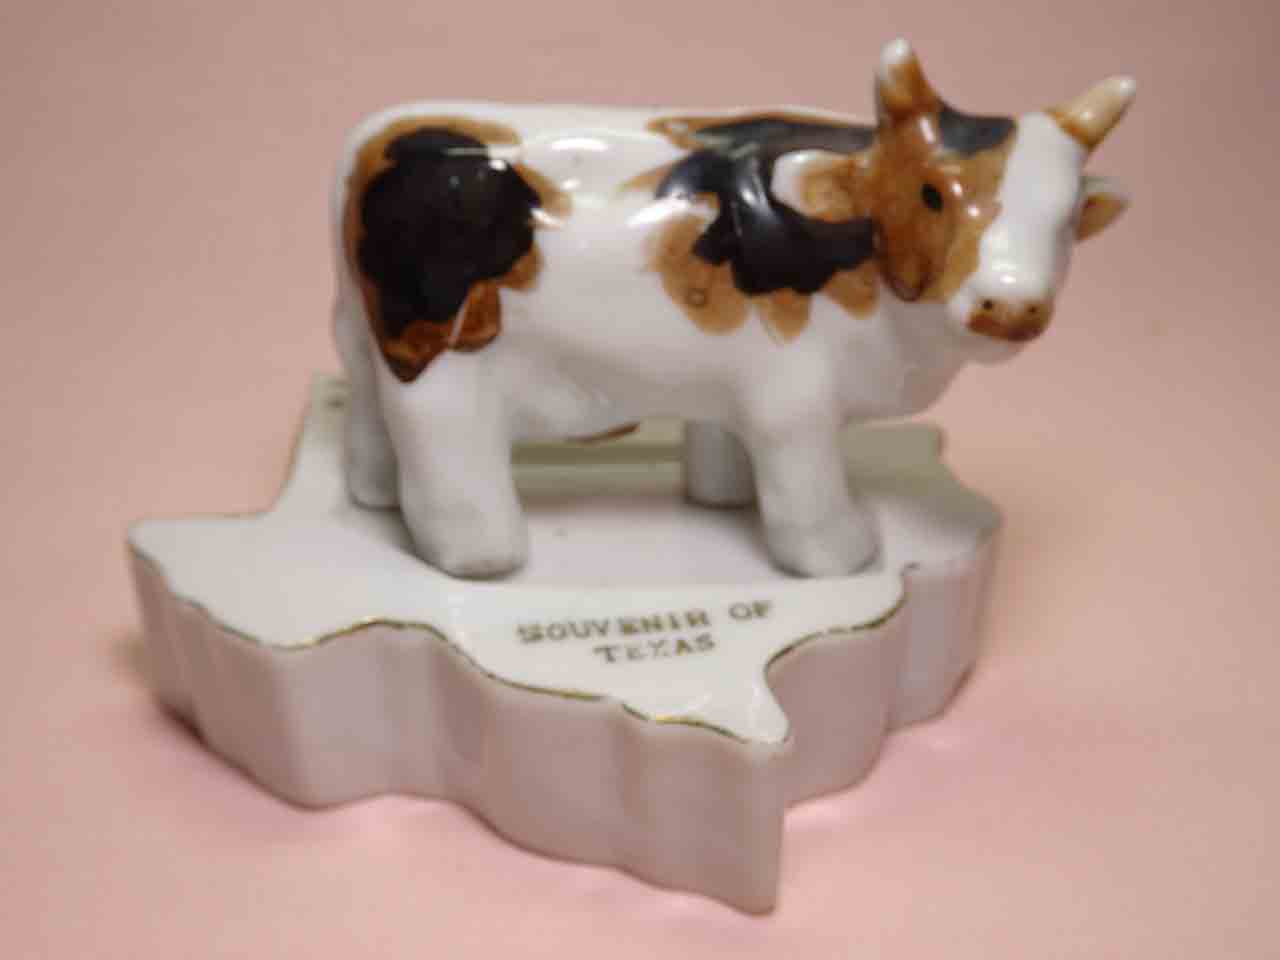 Texas with cattle salt and pepper shakers